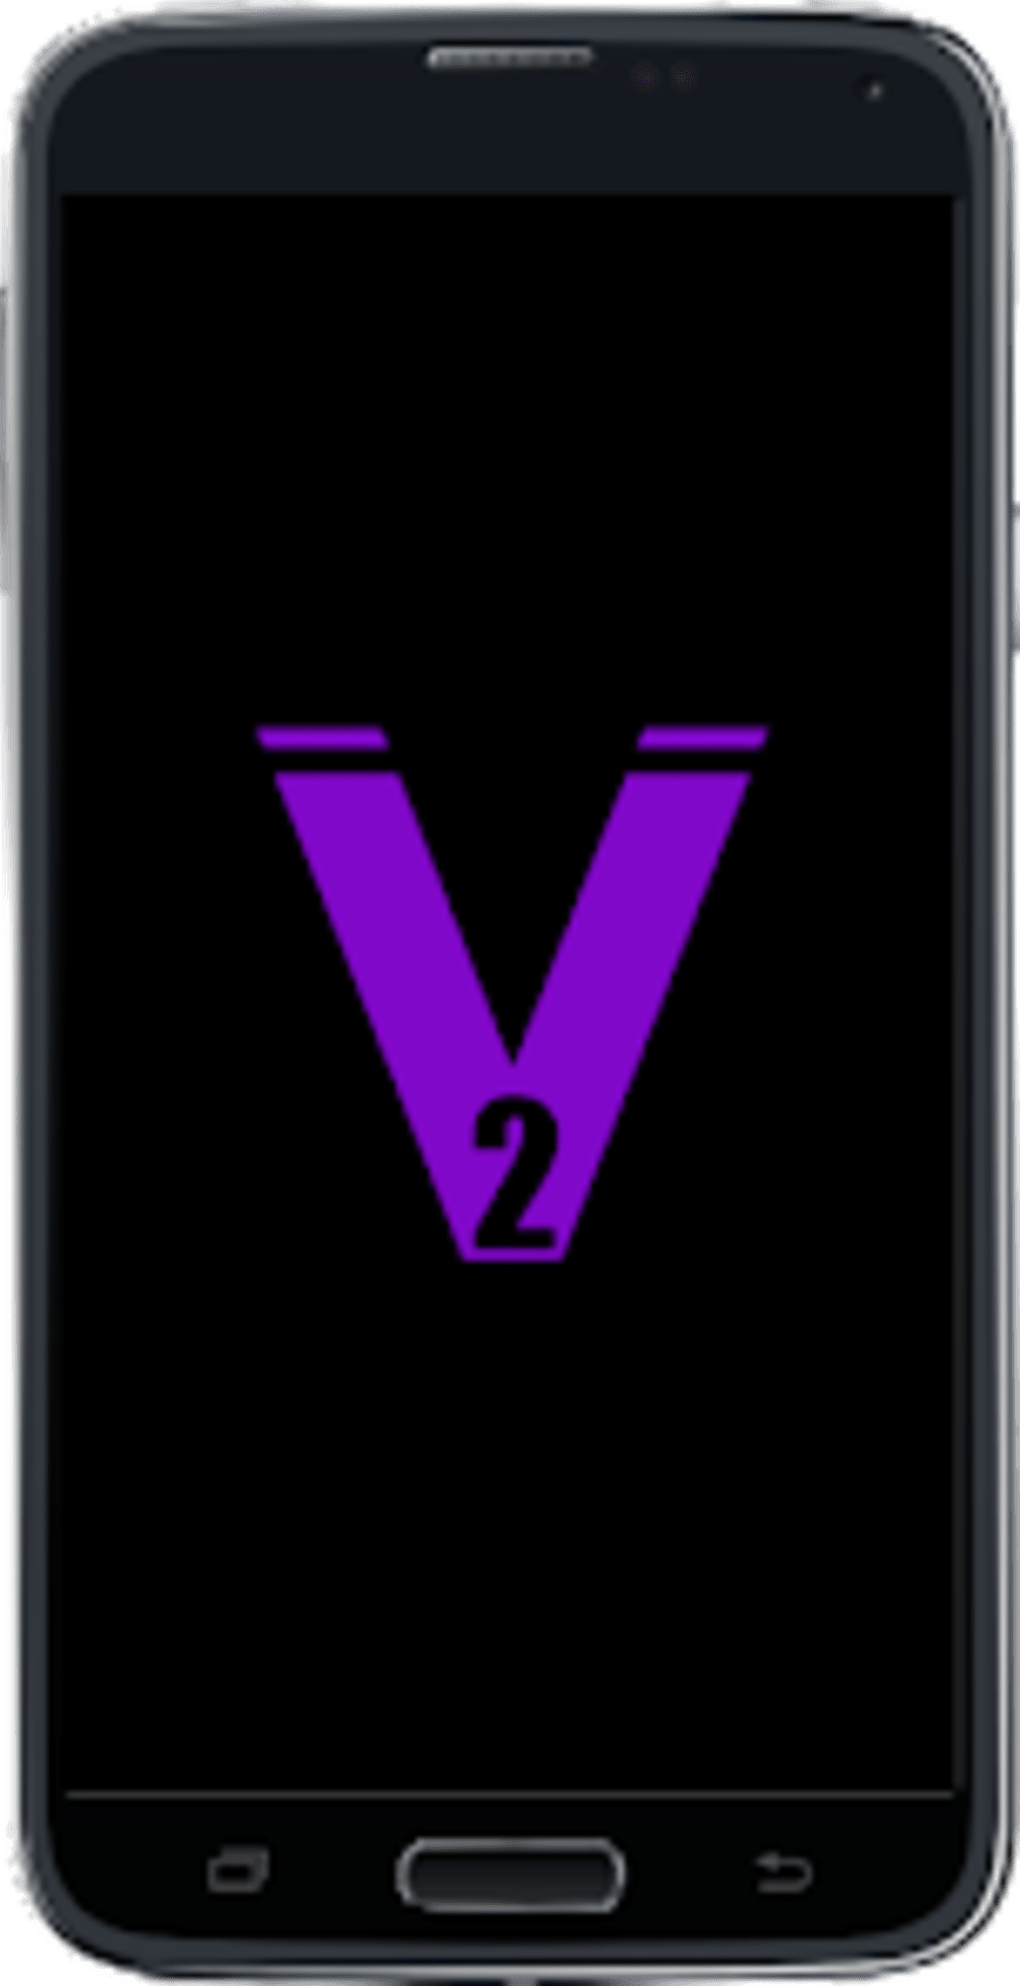 Vision Vibes APK 1.0.3 (Android App) - Download grátis